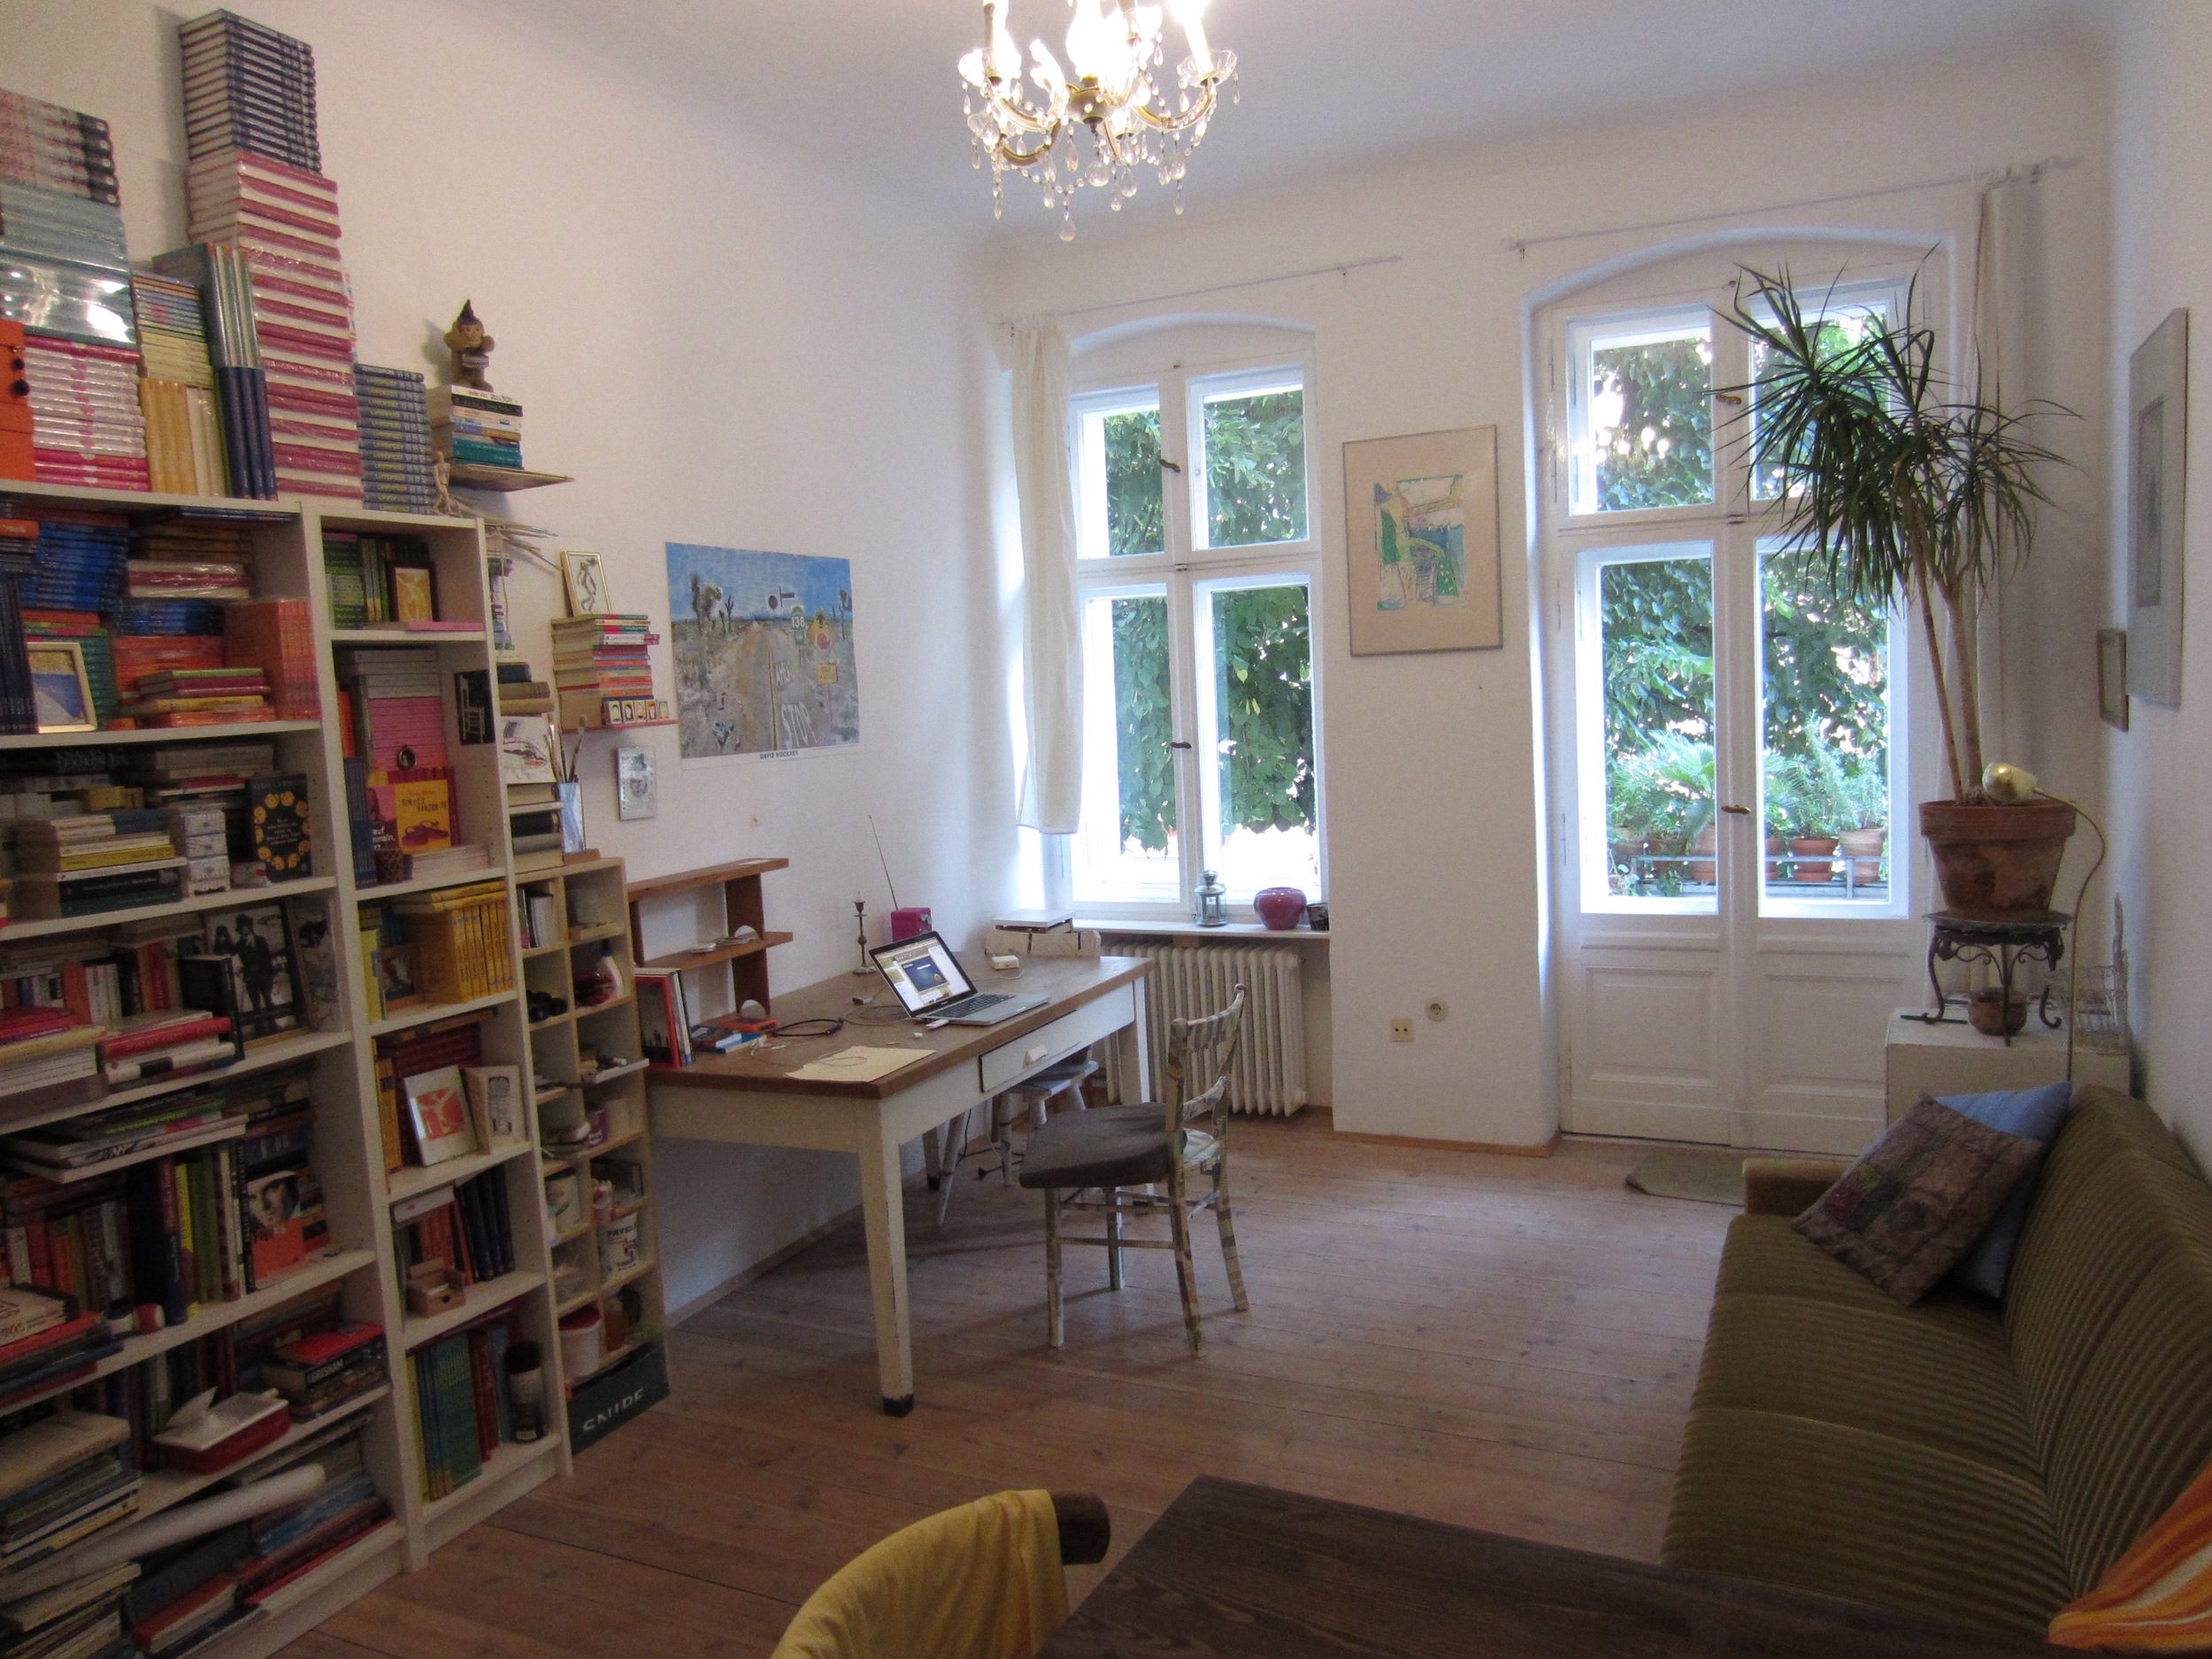   The lovely flat in Berlin's Neukölln district&nbsp;where I got a lot of writing done&nbsp;during my Fall 2013 residency with English Theatre Berlin.  